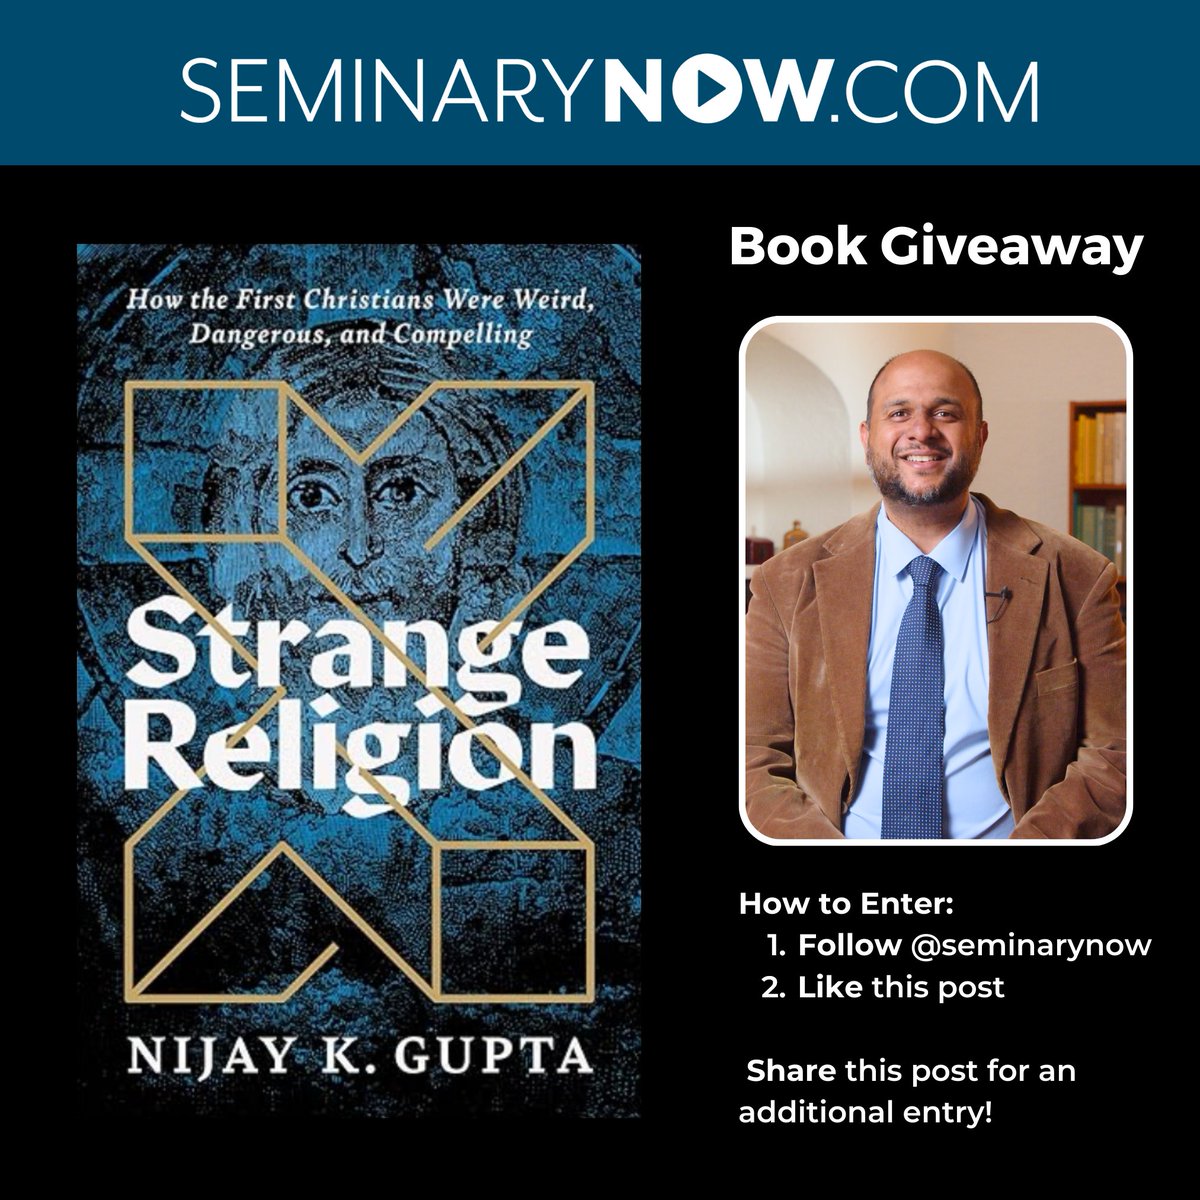 📚 BOOK GIVEAWAY ALERT! 🎉 Want to win a free copy of Strange Religion from @nijayKgupta? We're giving away this must-read! To enter: 1. Follow our page 2. Like this post 3. Tag a friend who'd love this book Winner announced Friday! #giveaway #reading #Christian